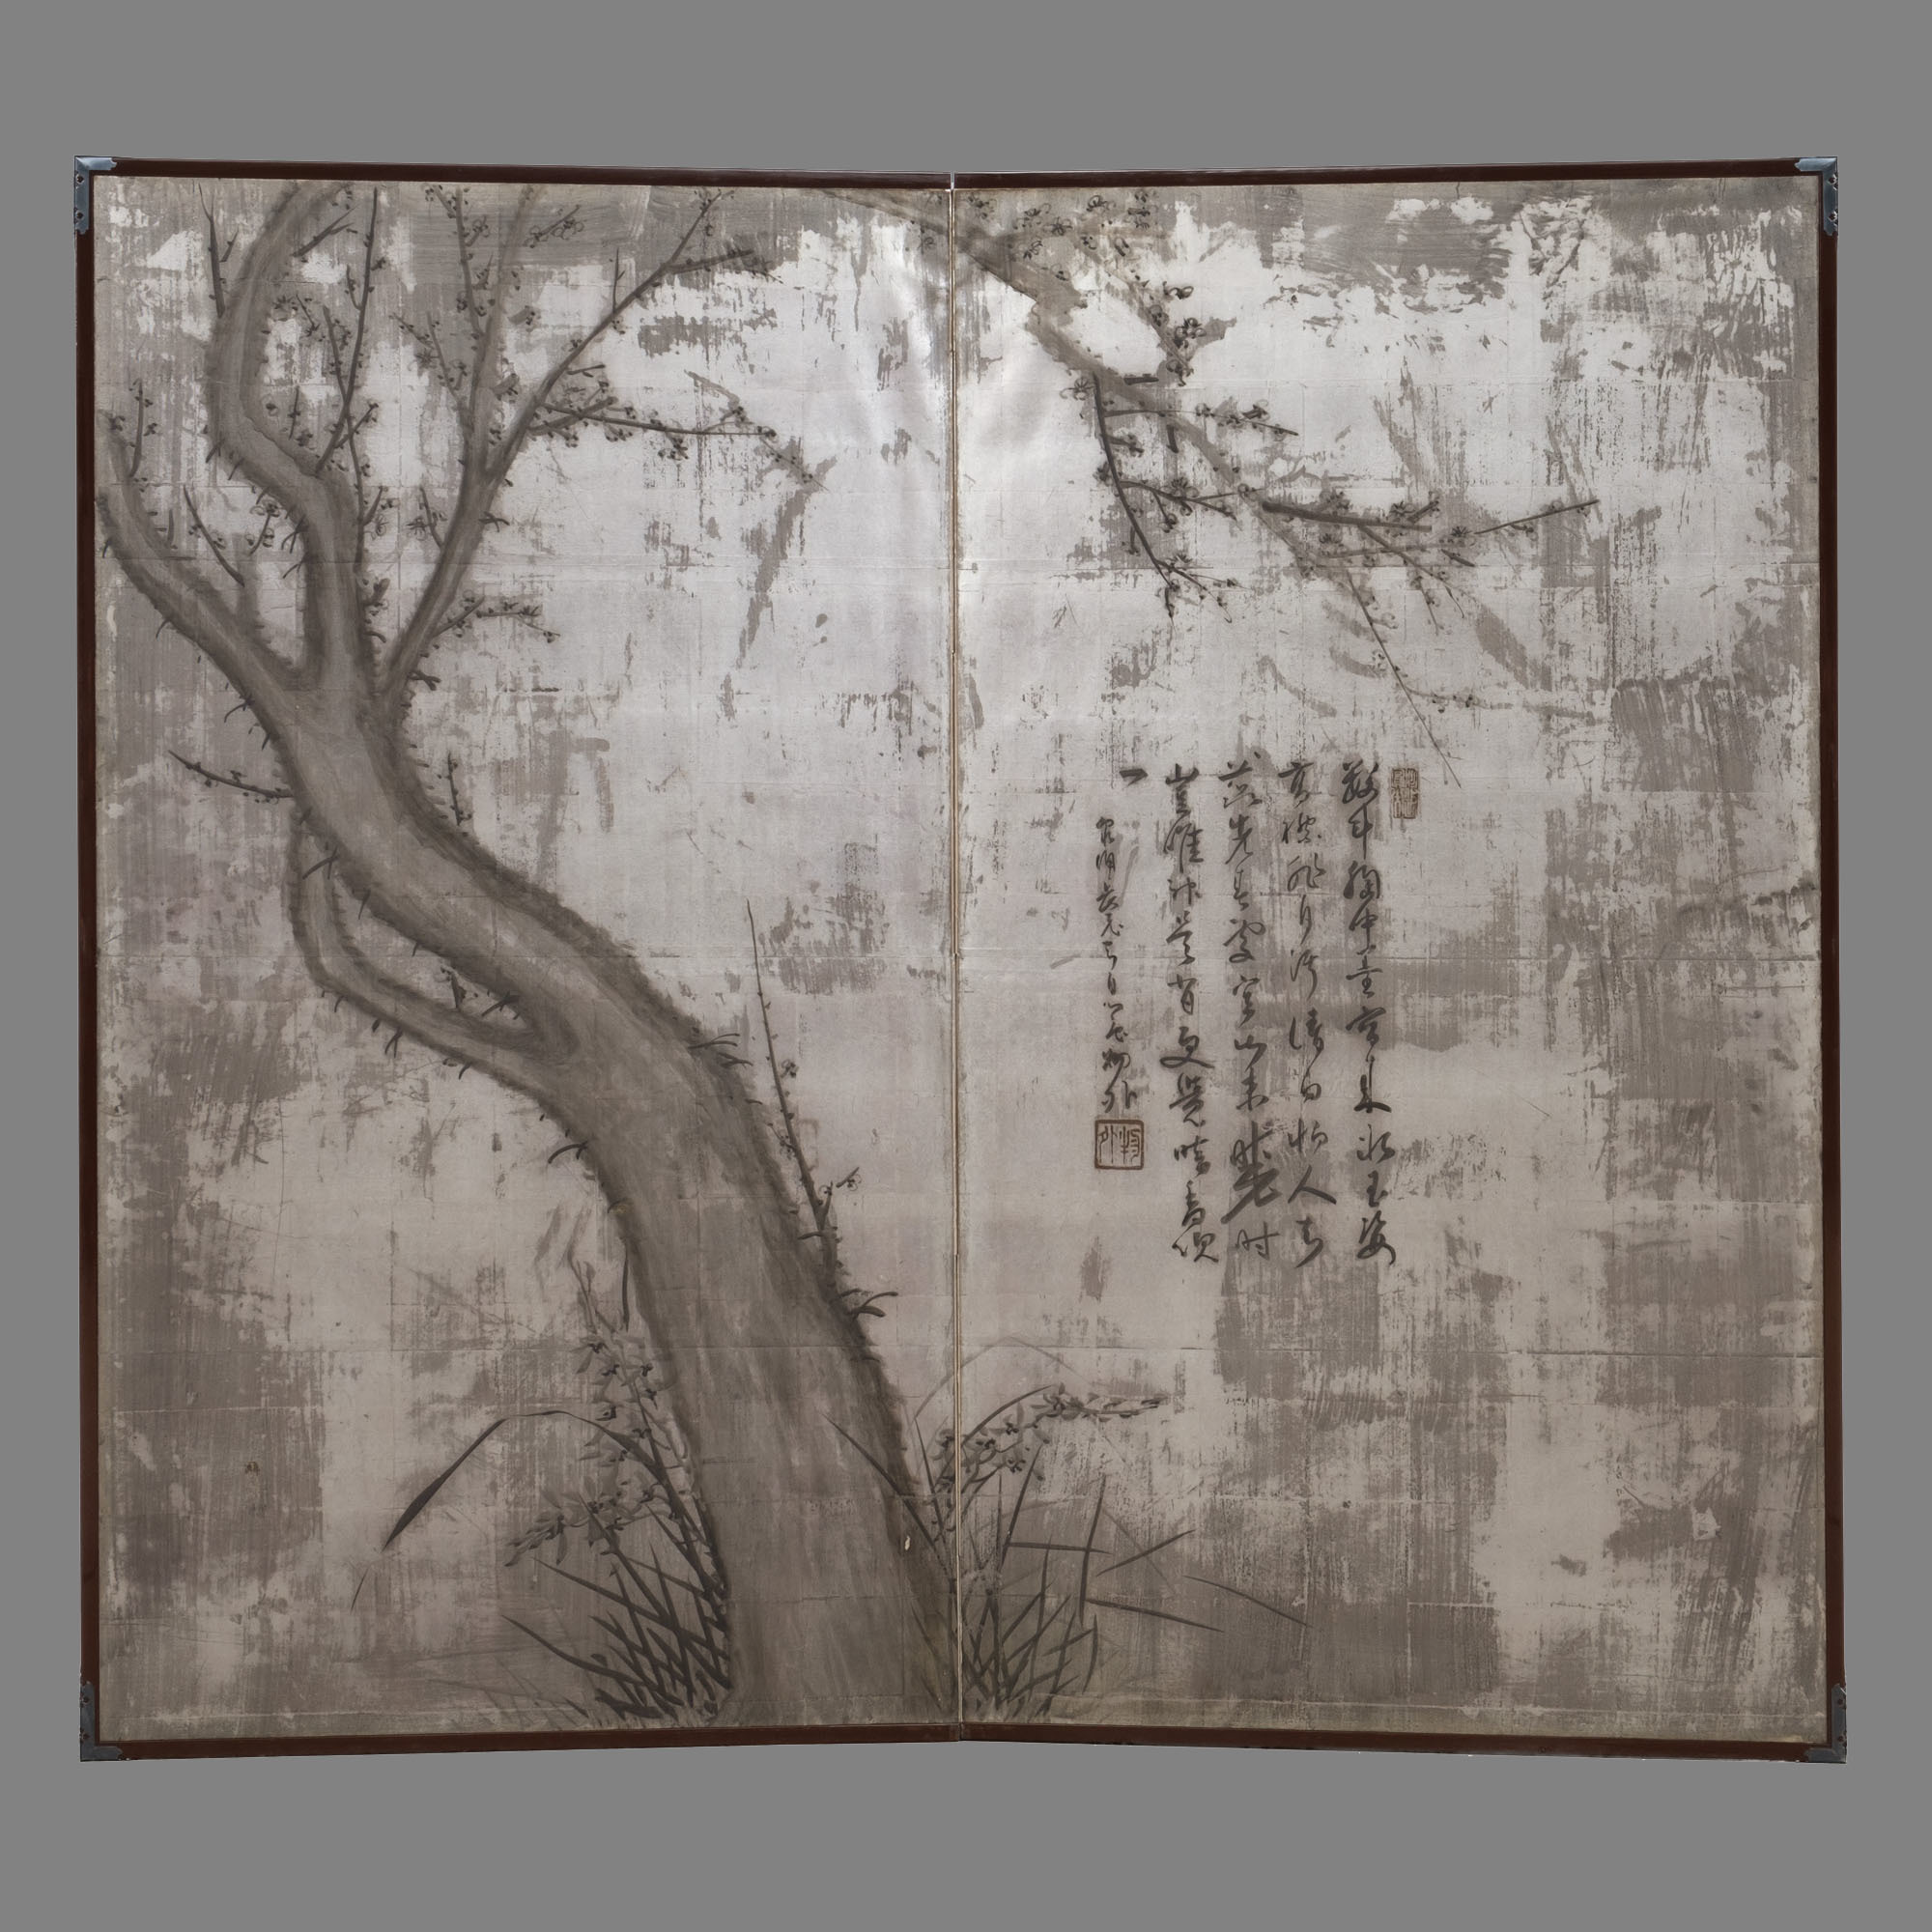 A JAPANESE TWO-PANEL SILVER LEAF ROOM DIVIDER 屏風 (BYÔBU) BY 